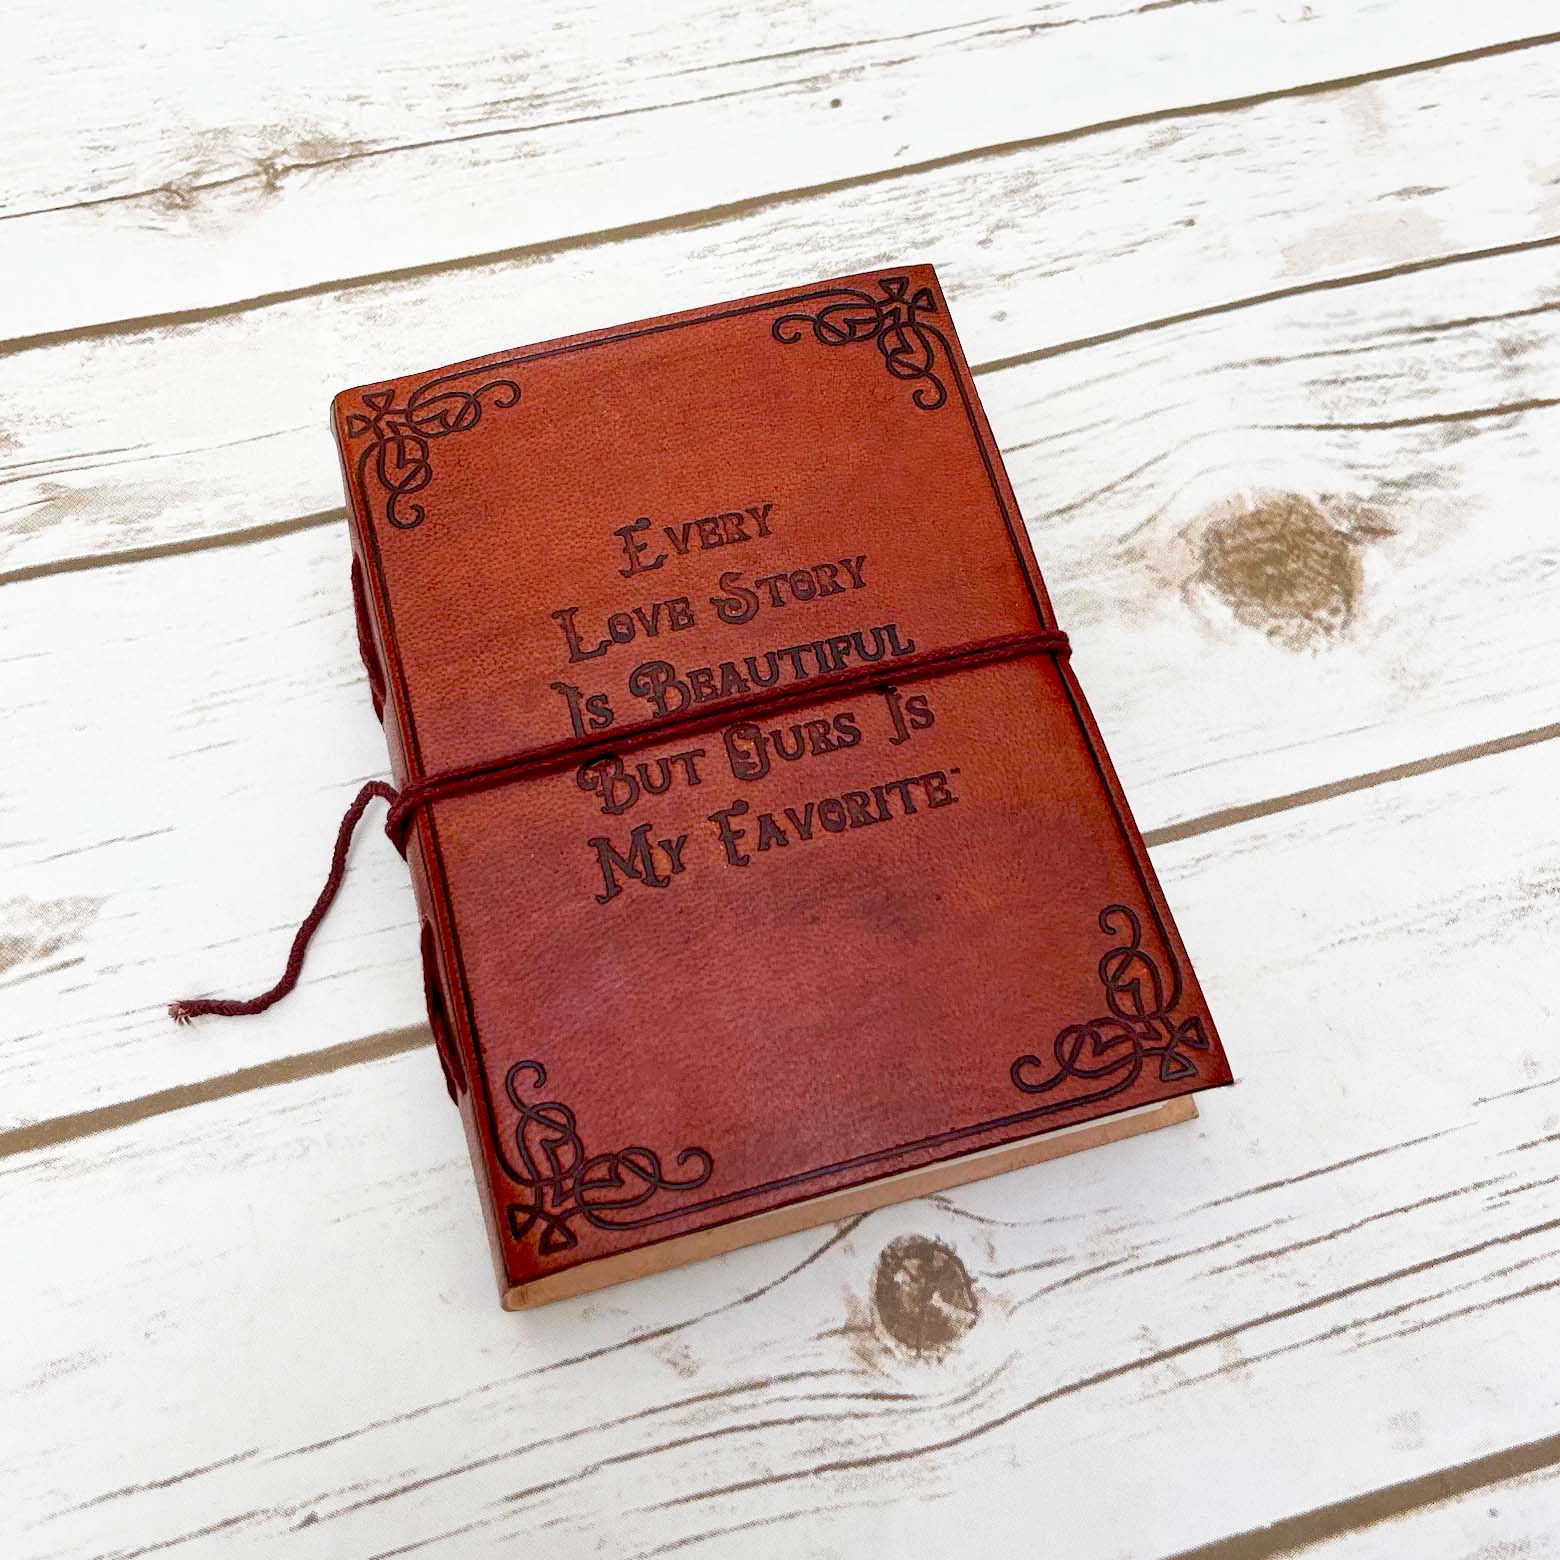 Every Love Story Is Beautiful Quote Leather Journal - 7x5